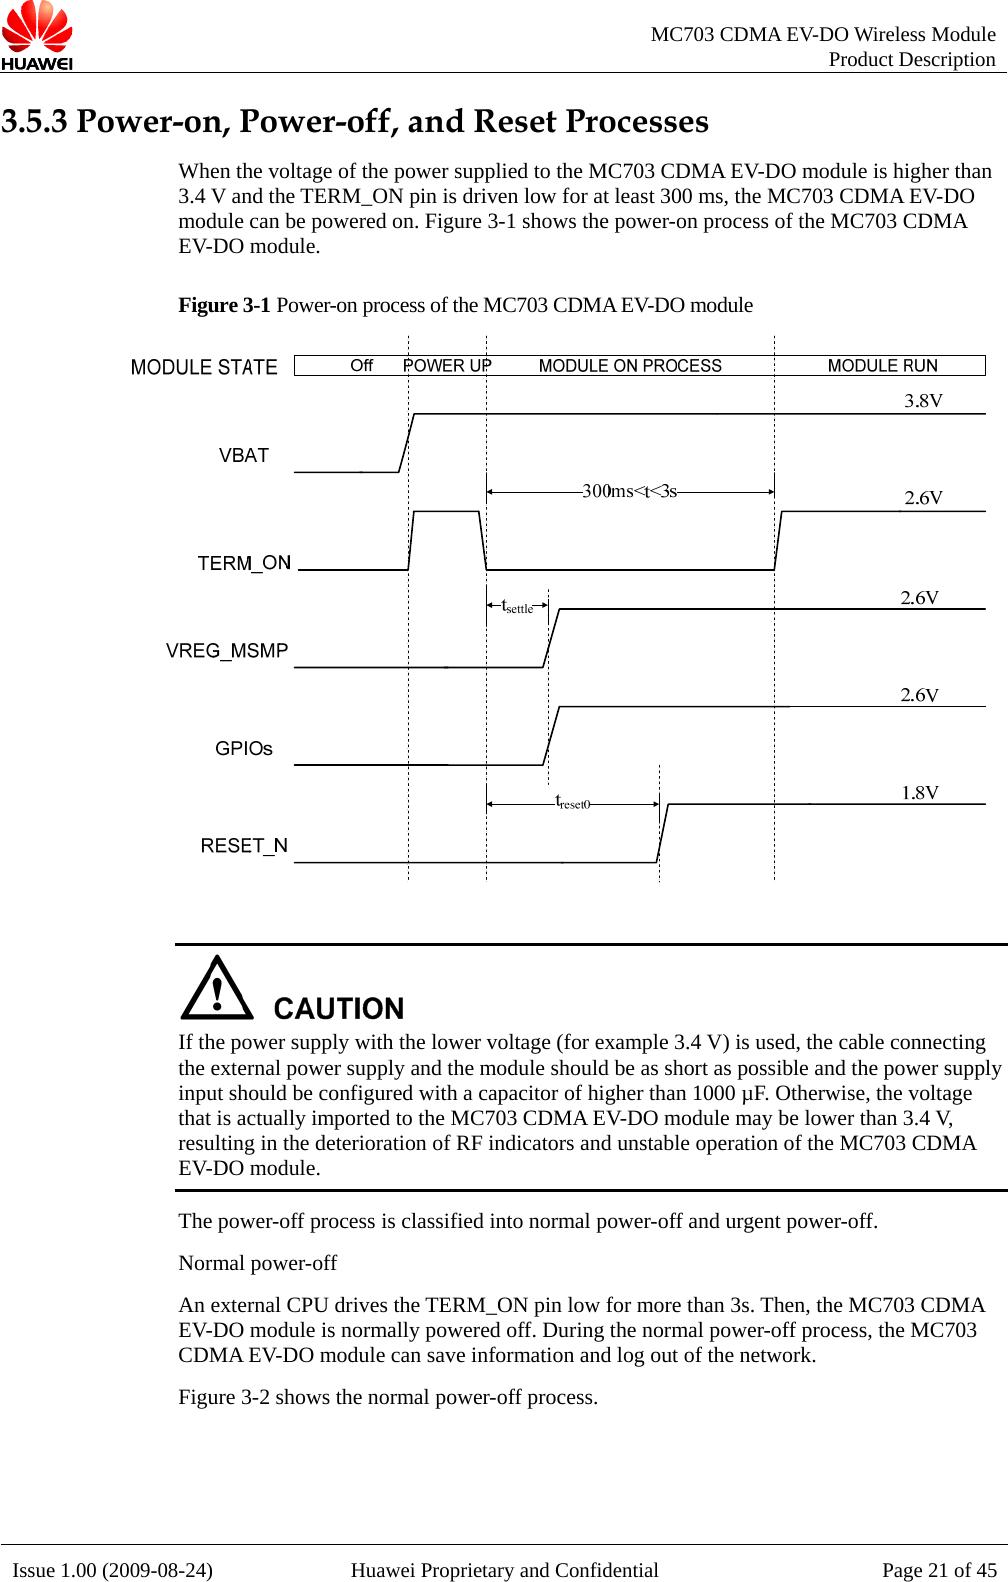   MC703 CDMA EV-DO Wireless Module Product Description Issue 1.00 (2009-08-24)  Huawei Proprietary and Confidential Page 21 of 453.5.3 Power-on, Power-off, and Reset Processes When the voltage of the power supplied to the MC703 CDMA EV-DO module is higher than 3.4 V and the TERM_ON pin is driven low for at least 300 ms, the MC703 CDMA EV-DO module can be powered on. Figure 3-1 shows the power-on process of the MC703 CDMA EV-DO module. Figure 3-1 Power-on process of the MC703 CDMA EV-DO module    If the power supply with the lower voltage (for example 3.4 V) is used, the cable connecting the external power supply and the module should be as short as possible and the power supply input should be configured with a capacitor of higher than 1000 µF. Otherwise, the voltage that is actually imported to the MC703 CDMA EV-DO module may be lower than 3.4 V, resulting in the deterioration of RF indicators and unstable operation of the MC703 CDMA EV-DO module. The power-off process is classified into normal power-off and urgent power-off.   Normal power-off An external CPU drives the TERM_ON pin low for more than 3s. Then, the MC703 CDMA EV-DO module is normally powered off. During the normal power-off process, the MC703 CDMA EV-DO module can save information and log out of the network. Figure 3-2 shows the normal power-off process.  